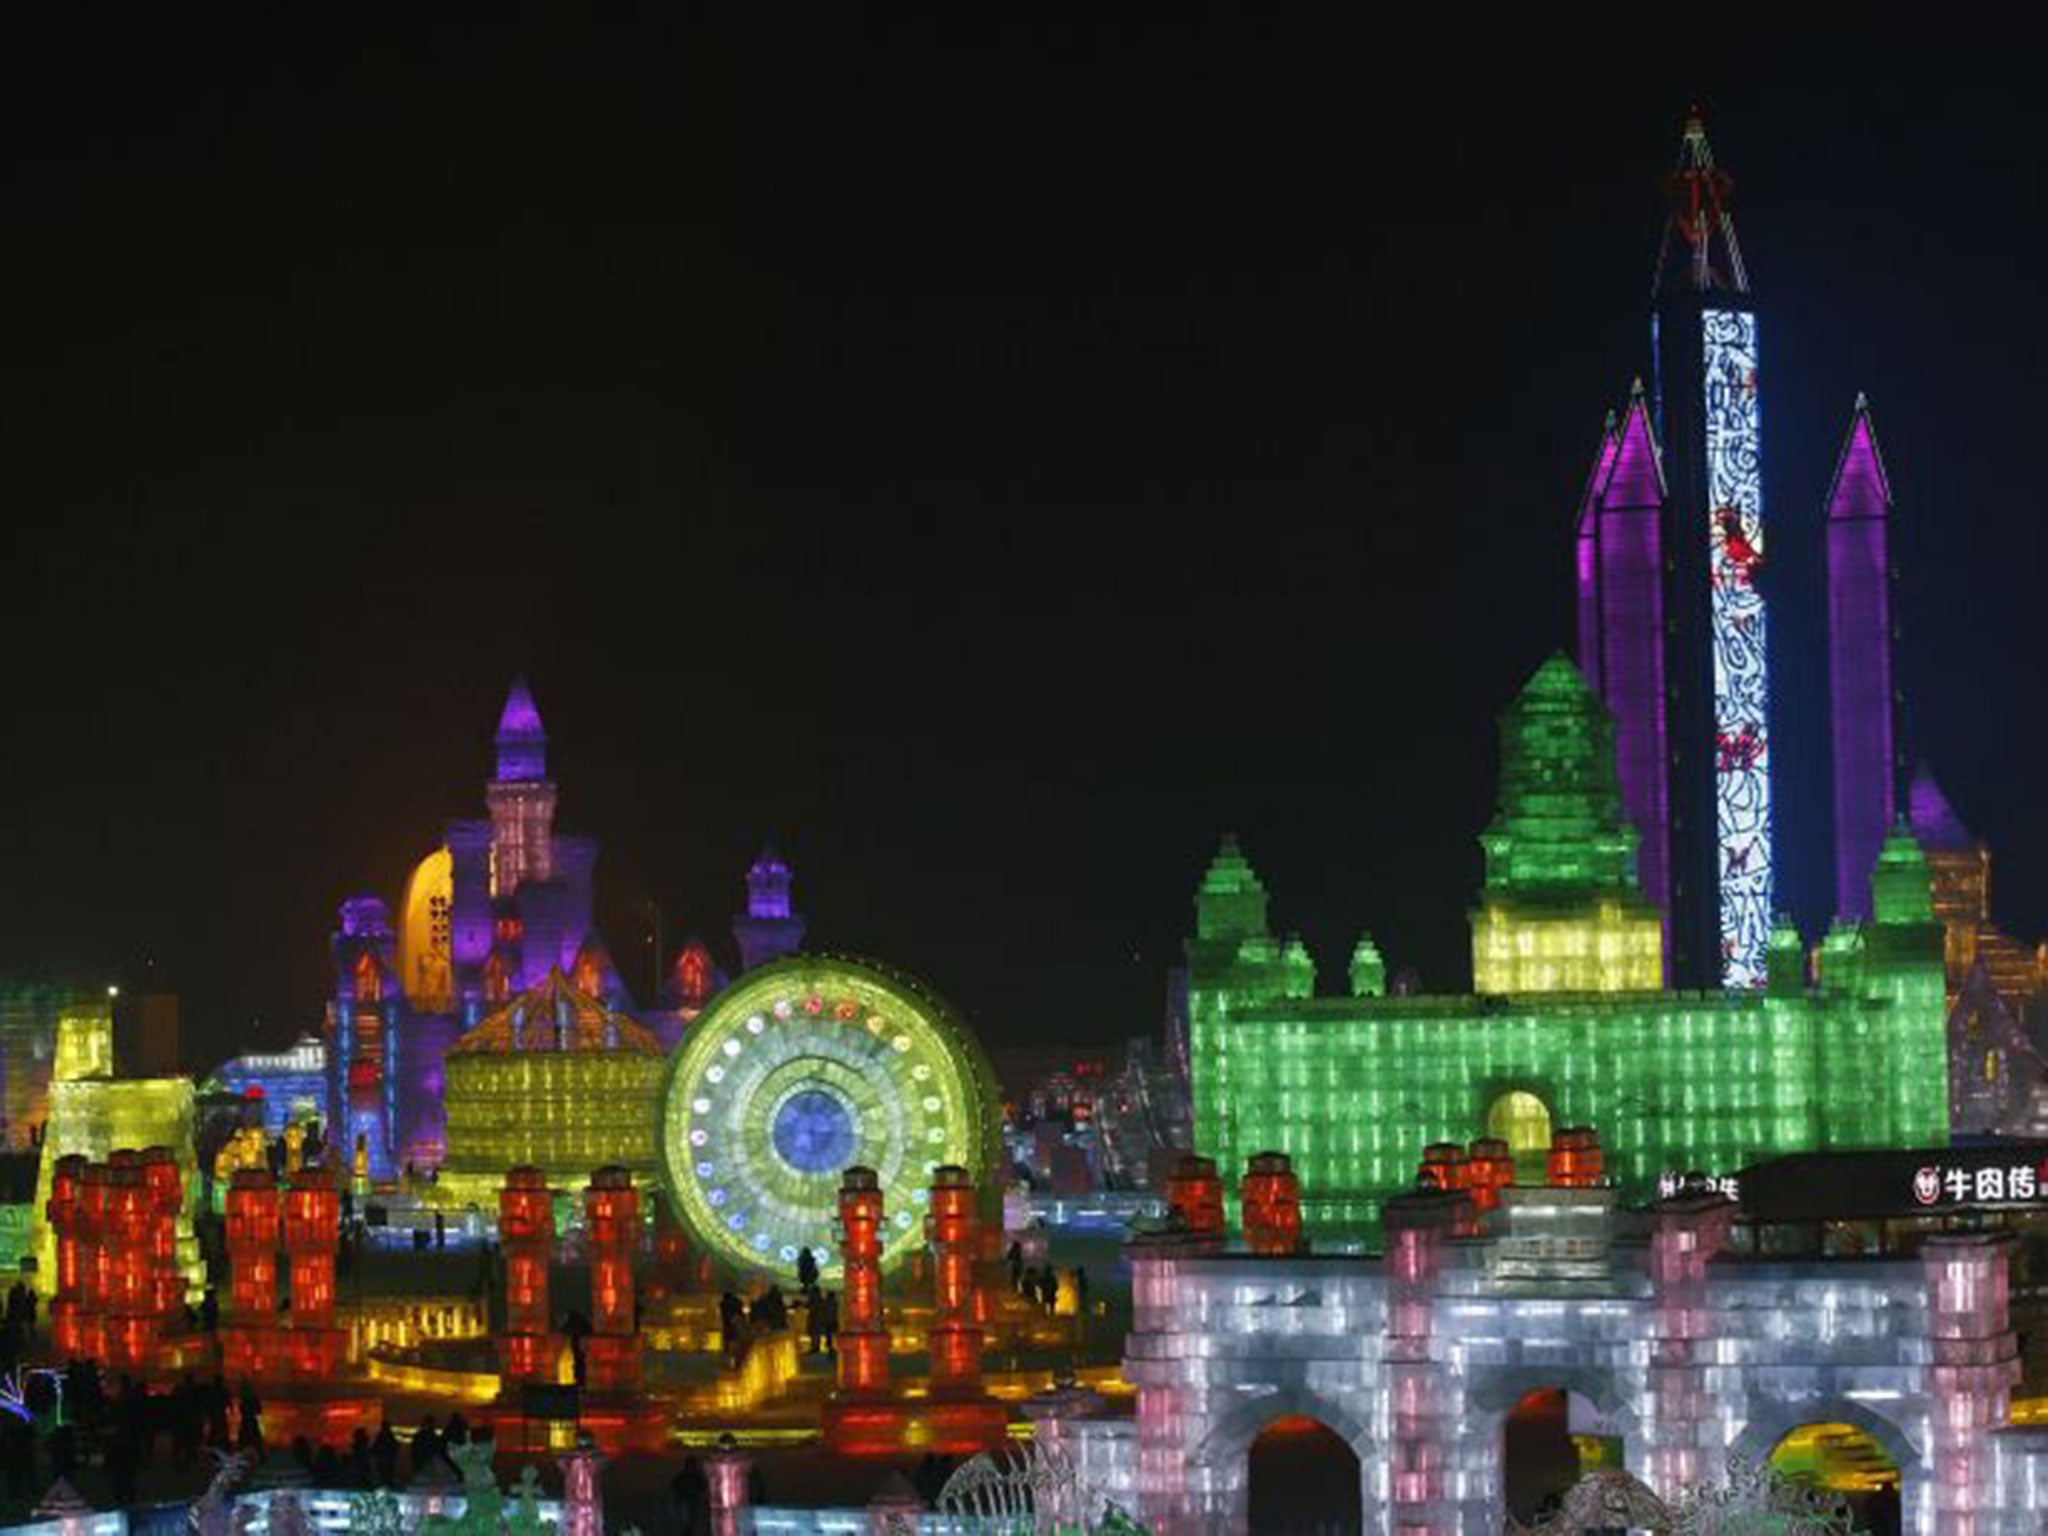 People visit a maze which was built by ice bricks and illuminated by coloured lights during a trial operation ahead of the 31st Harbin International Ice and Snow Festival in the northern city of Harbin, Heilongjiang province, January 4, 2015. The winter f